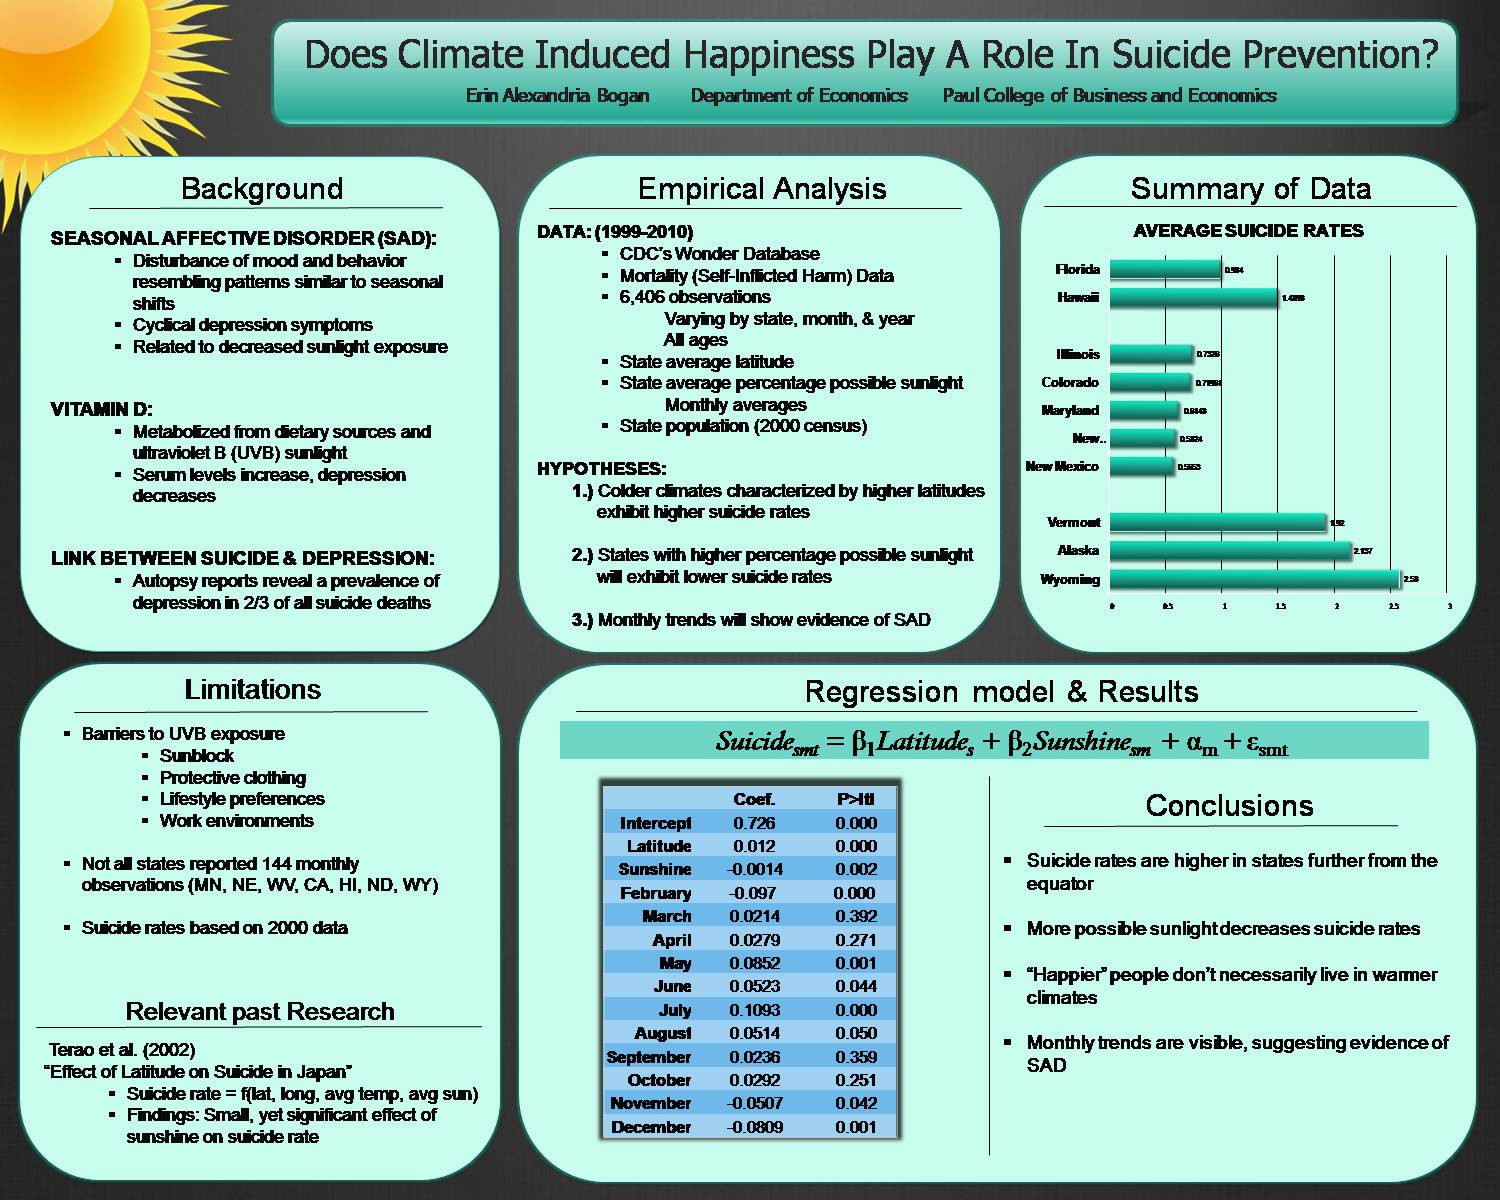 Does Climate Induced Happiness Play A Role In Suicide Prevention? by eay64